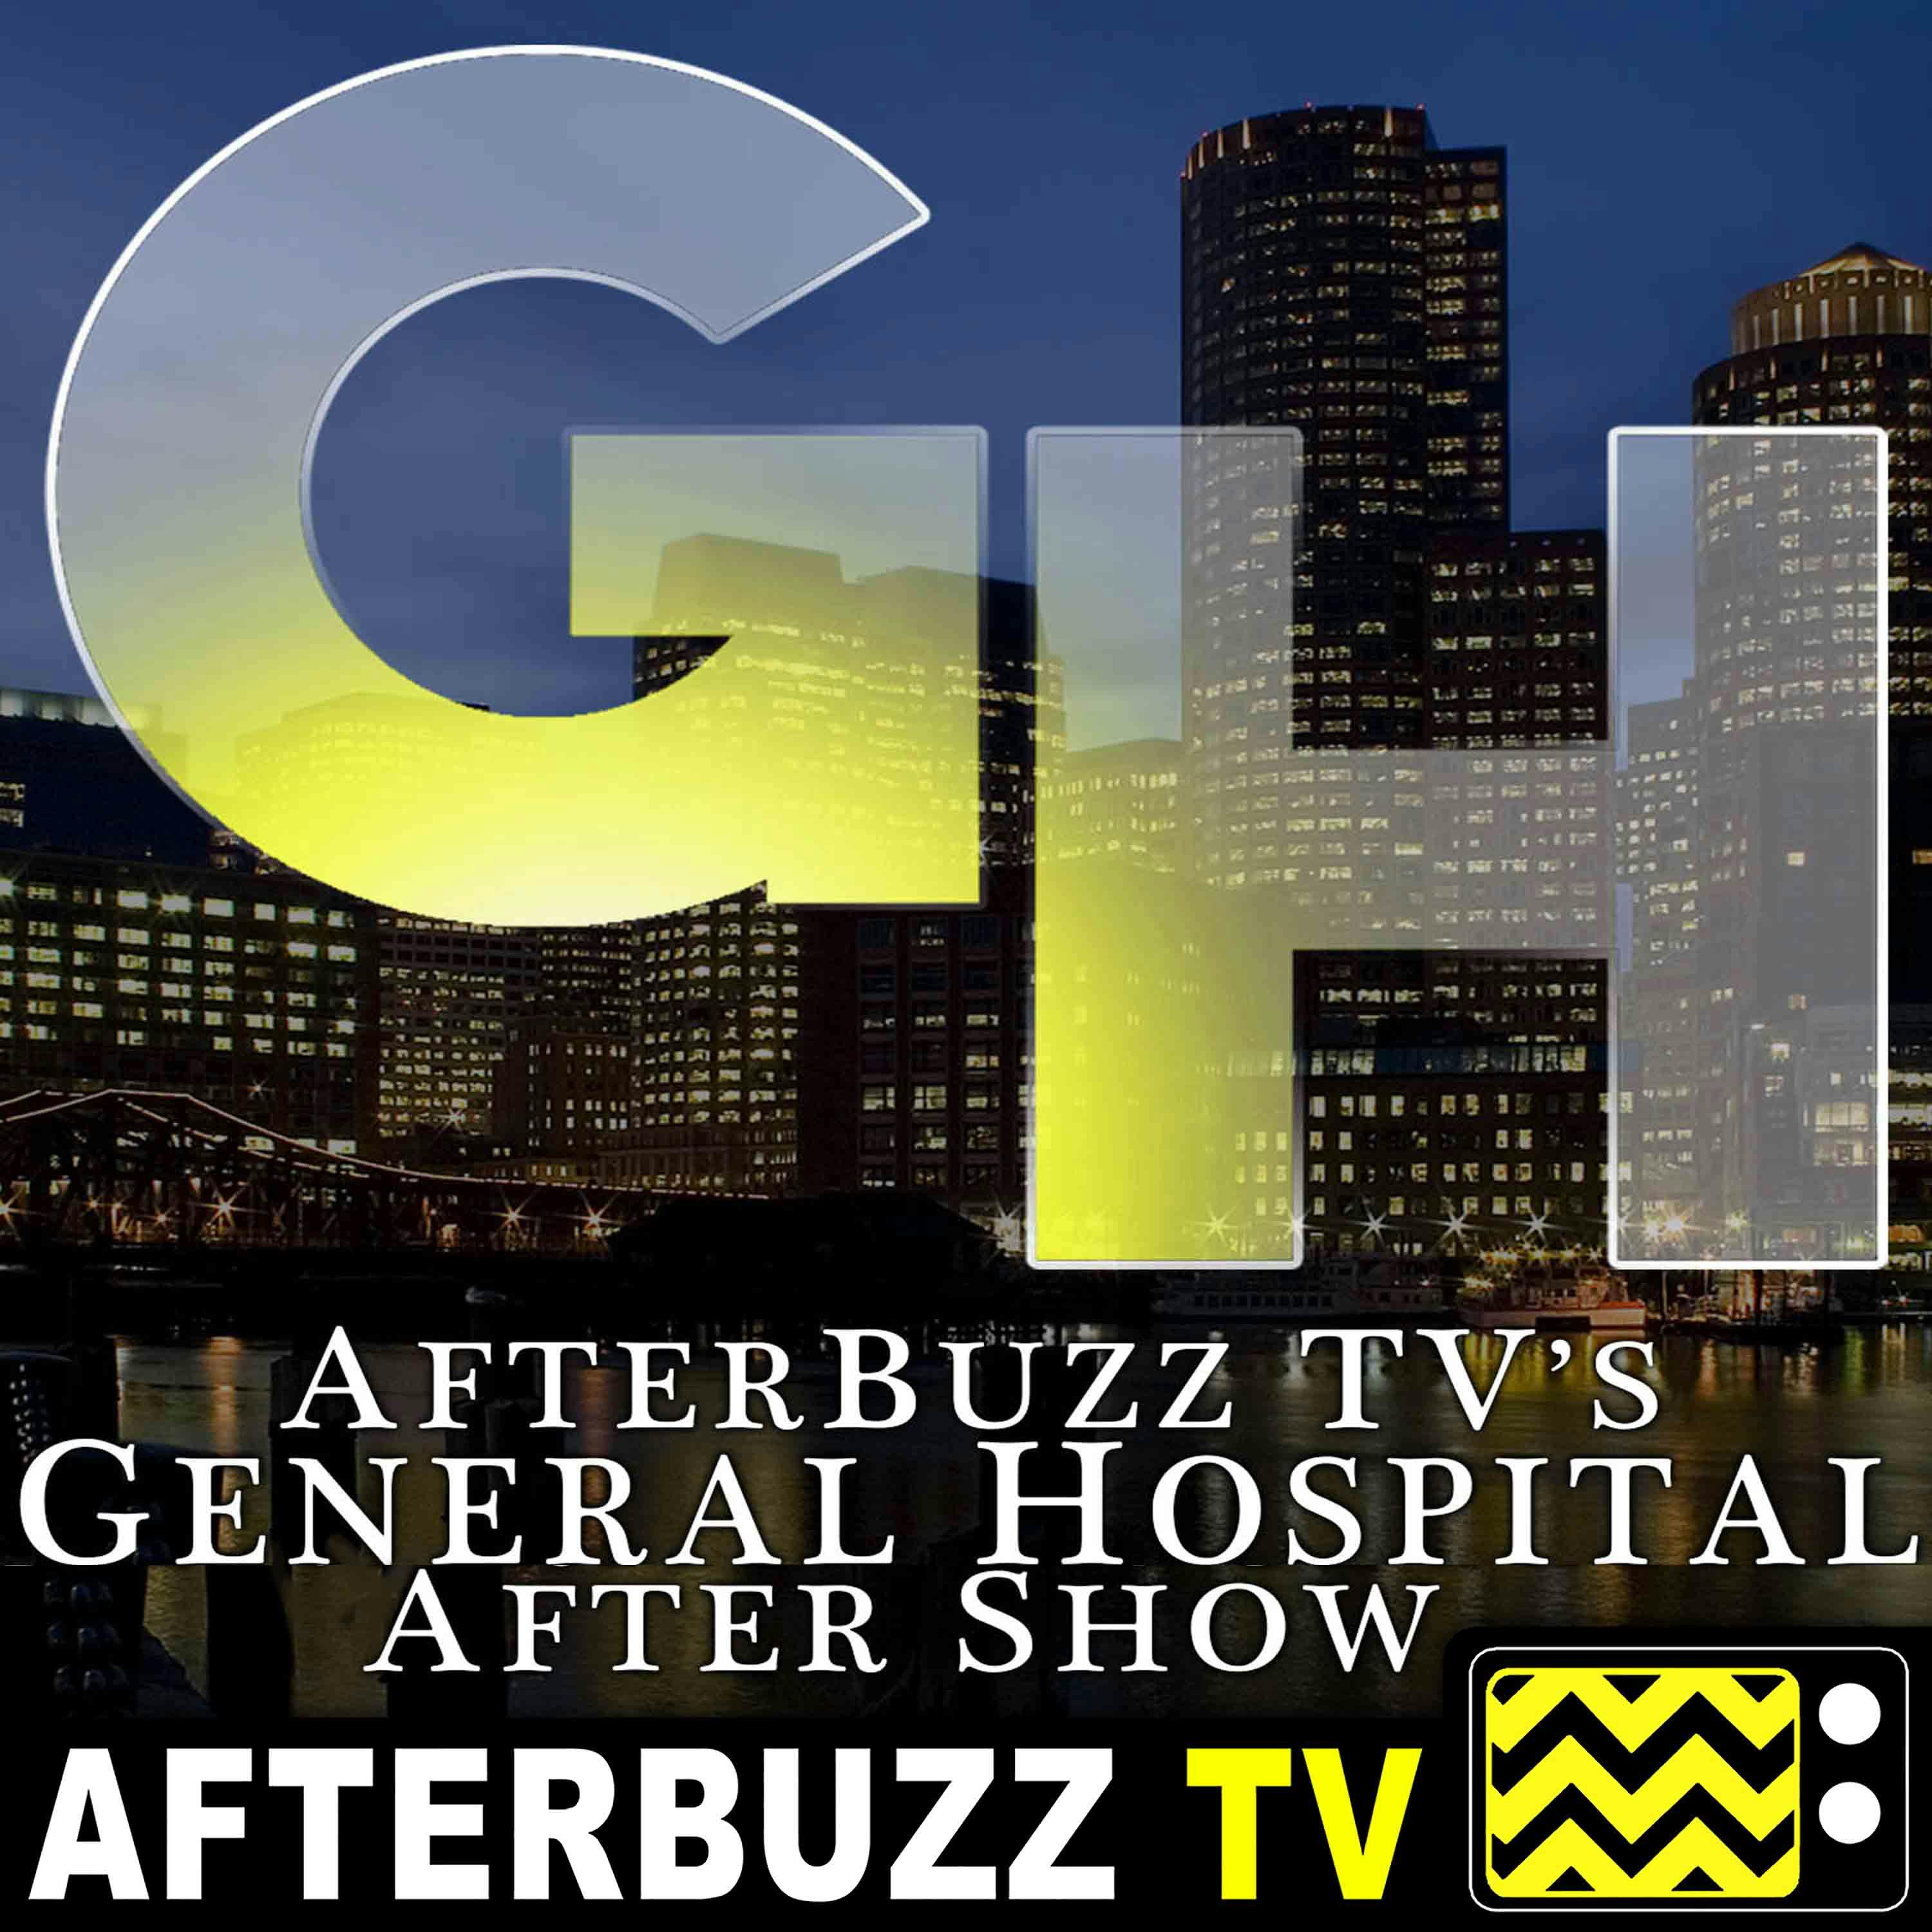 Review Of General Hospital for February 25th - March 1st, 2019